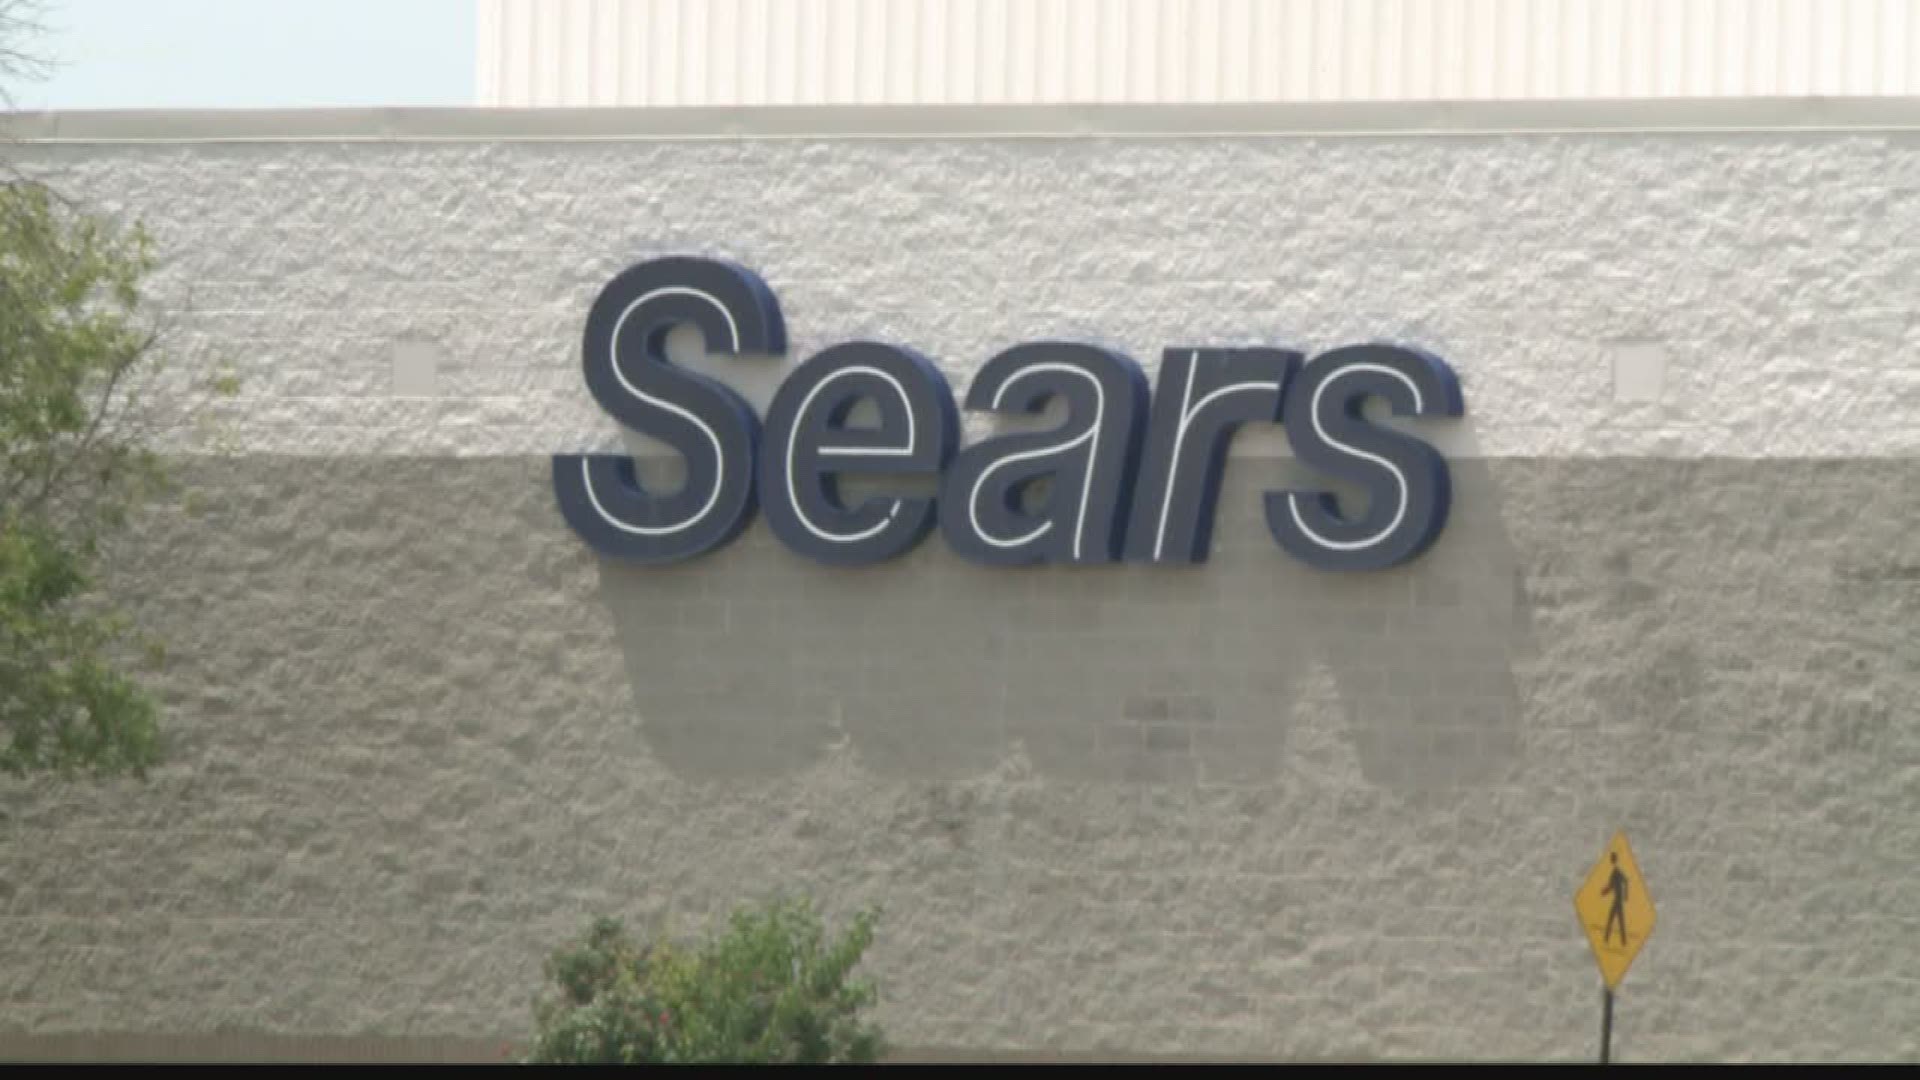 Sears said eligible associates will be offered the same number of weeks of severance as offered to employees of Sears Holdings Corporation prior to that company’s Chapter 11 filing in October 2018.